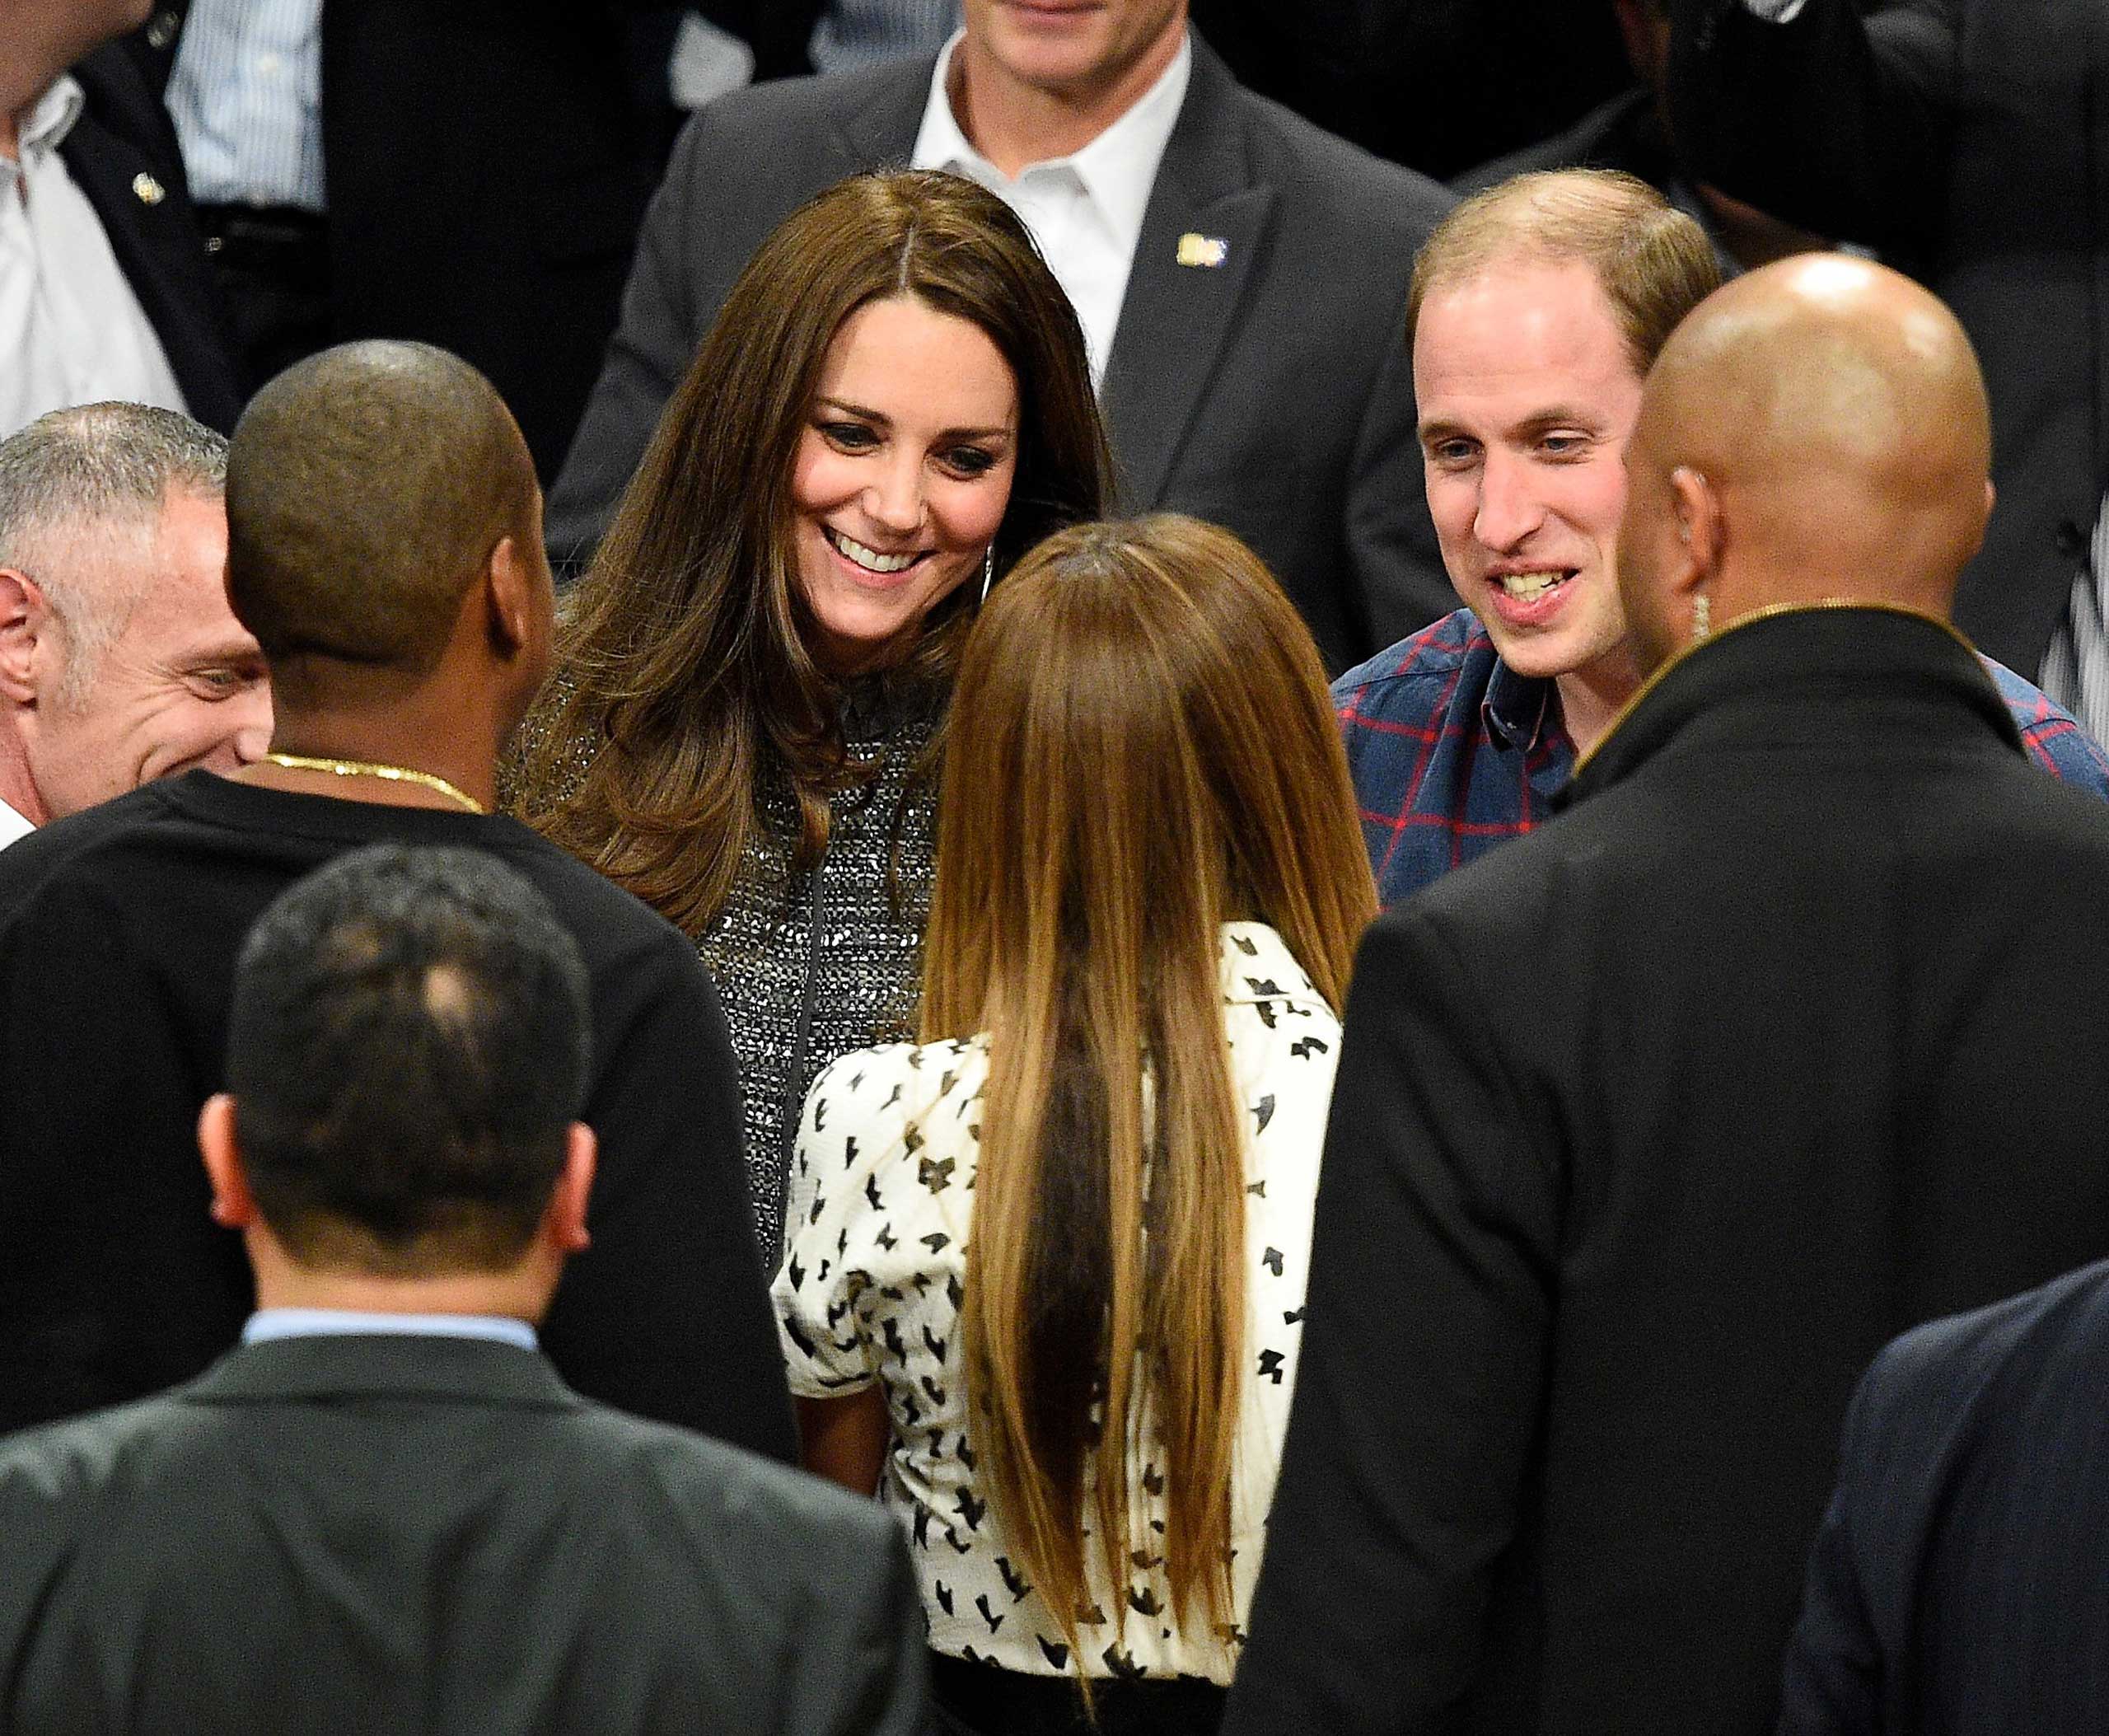 Between the 3rd and 4th quarter of the game, Beyonce and Jay Z approached the royal couple to say hello.